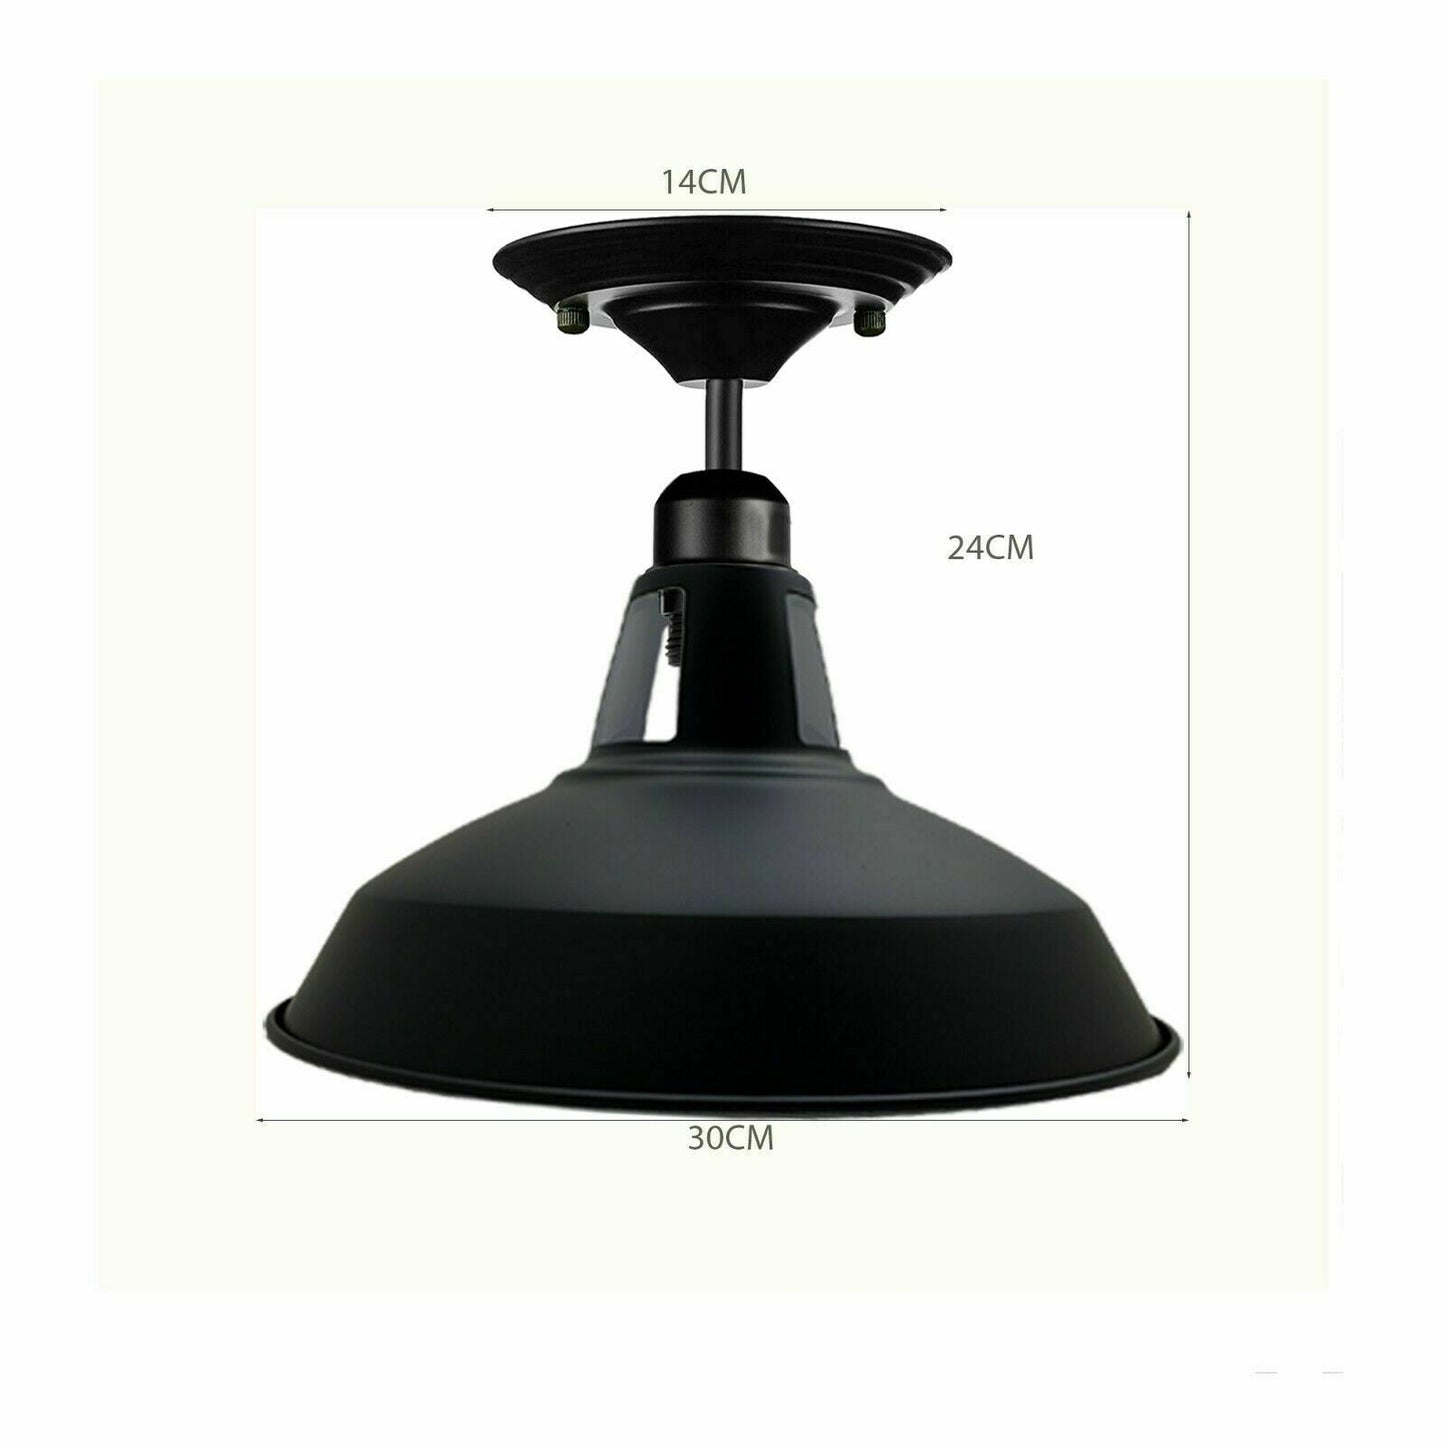 Modern Vintage Industrial Flush Mount Metal Fitting Scones Ceiling Light Shade with Screw E27 Bulb~1838